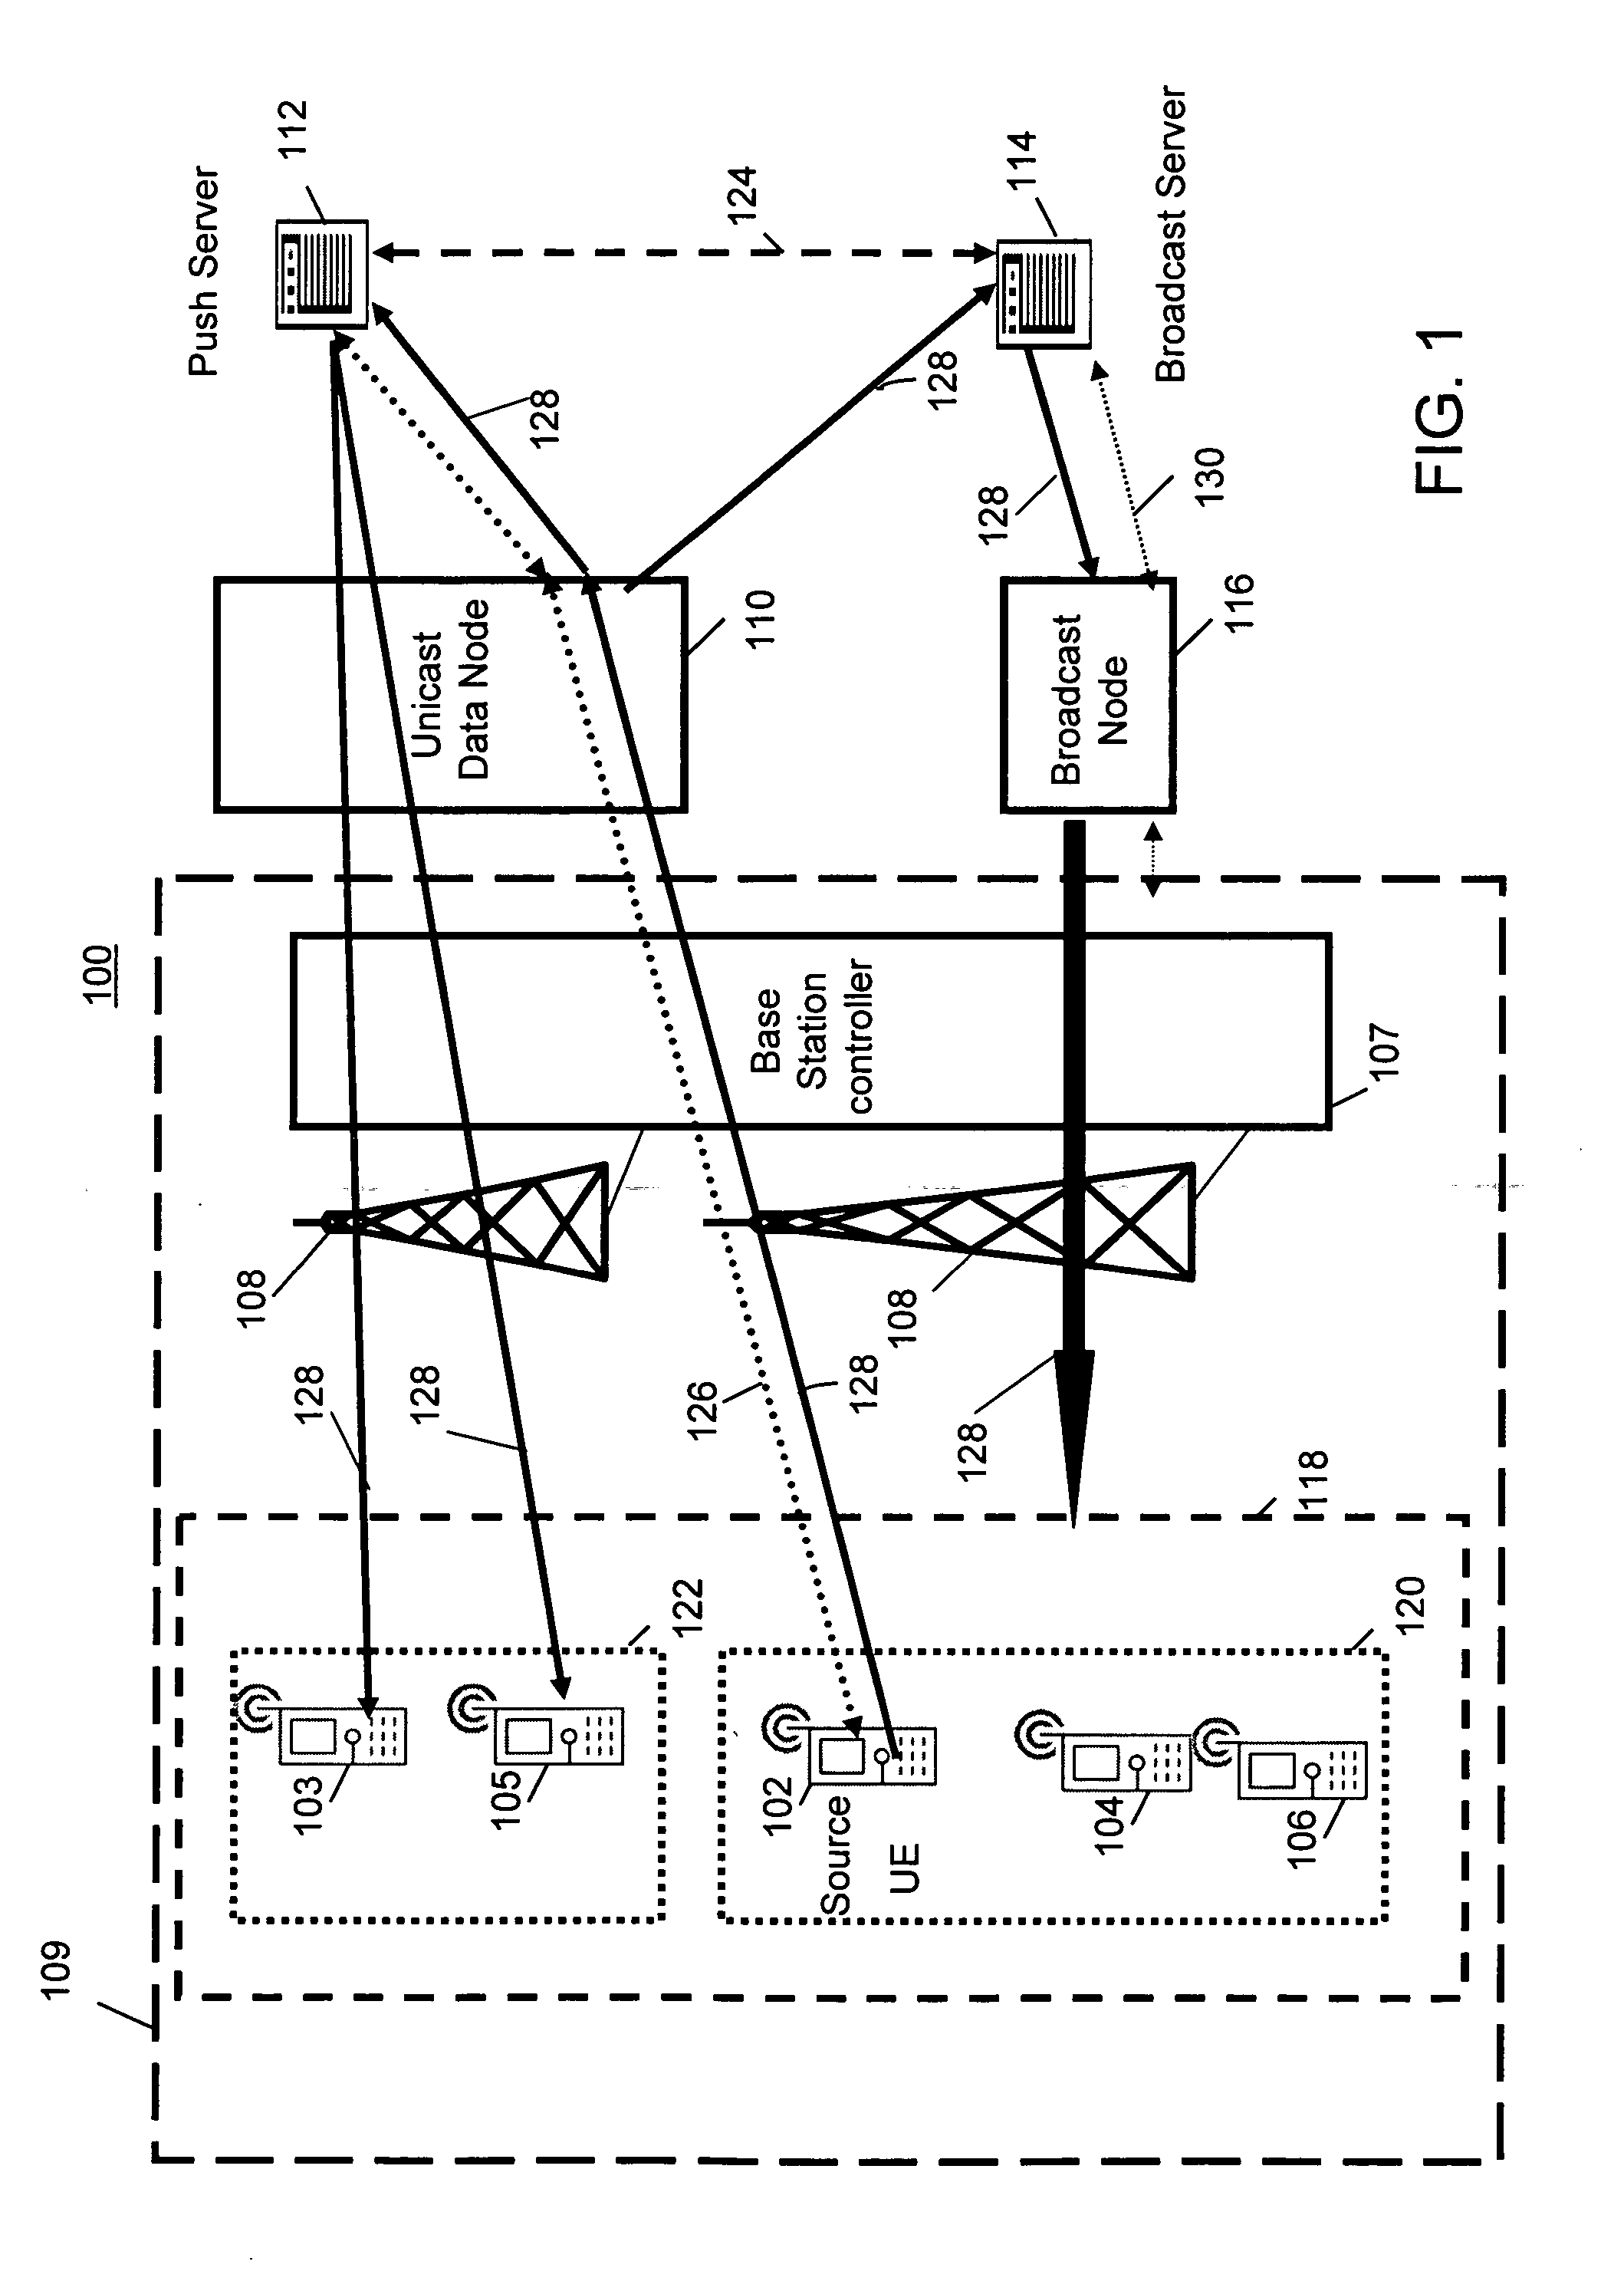 Method and system for multicasting data in a communication network